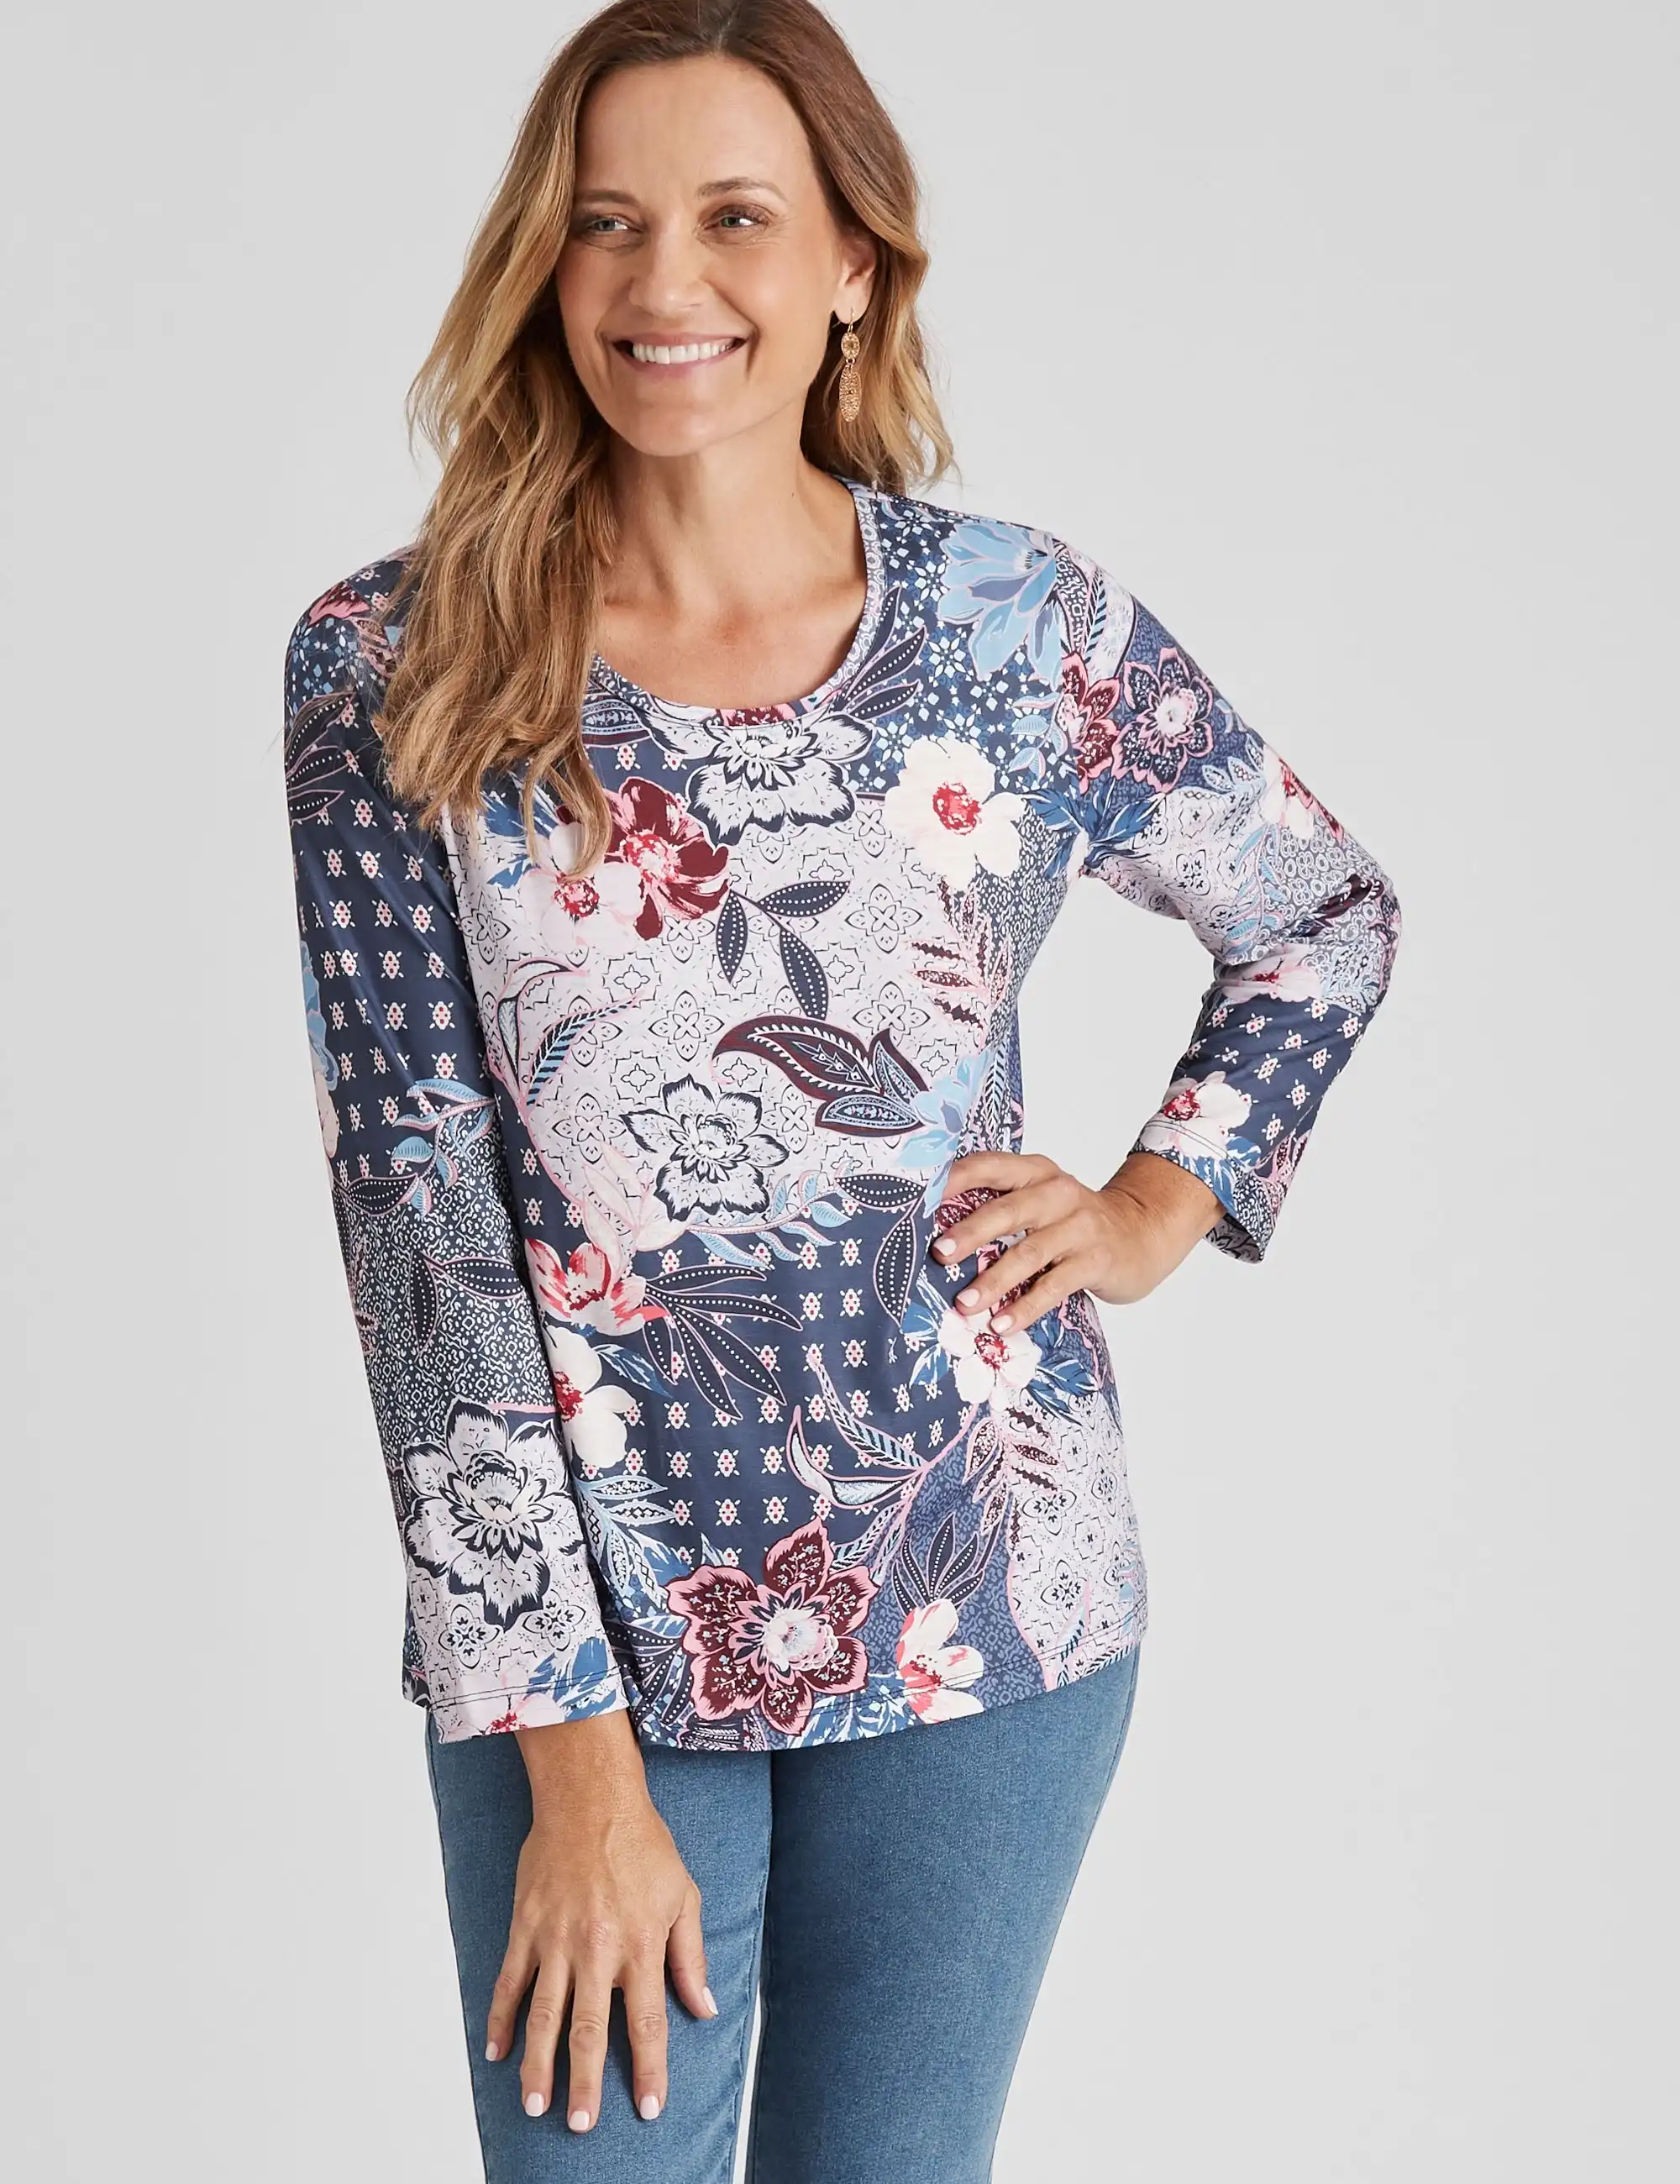 Millers Long Sleeve Sublimation Printed Top